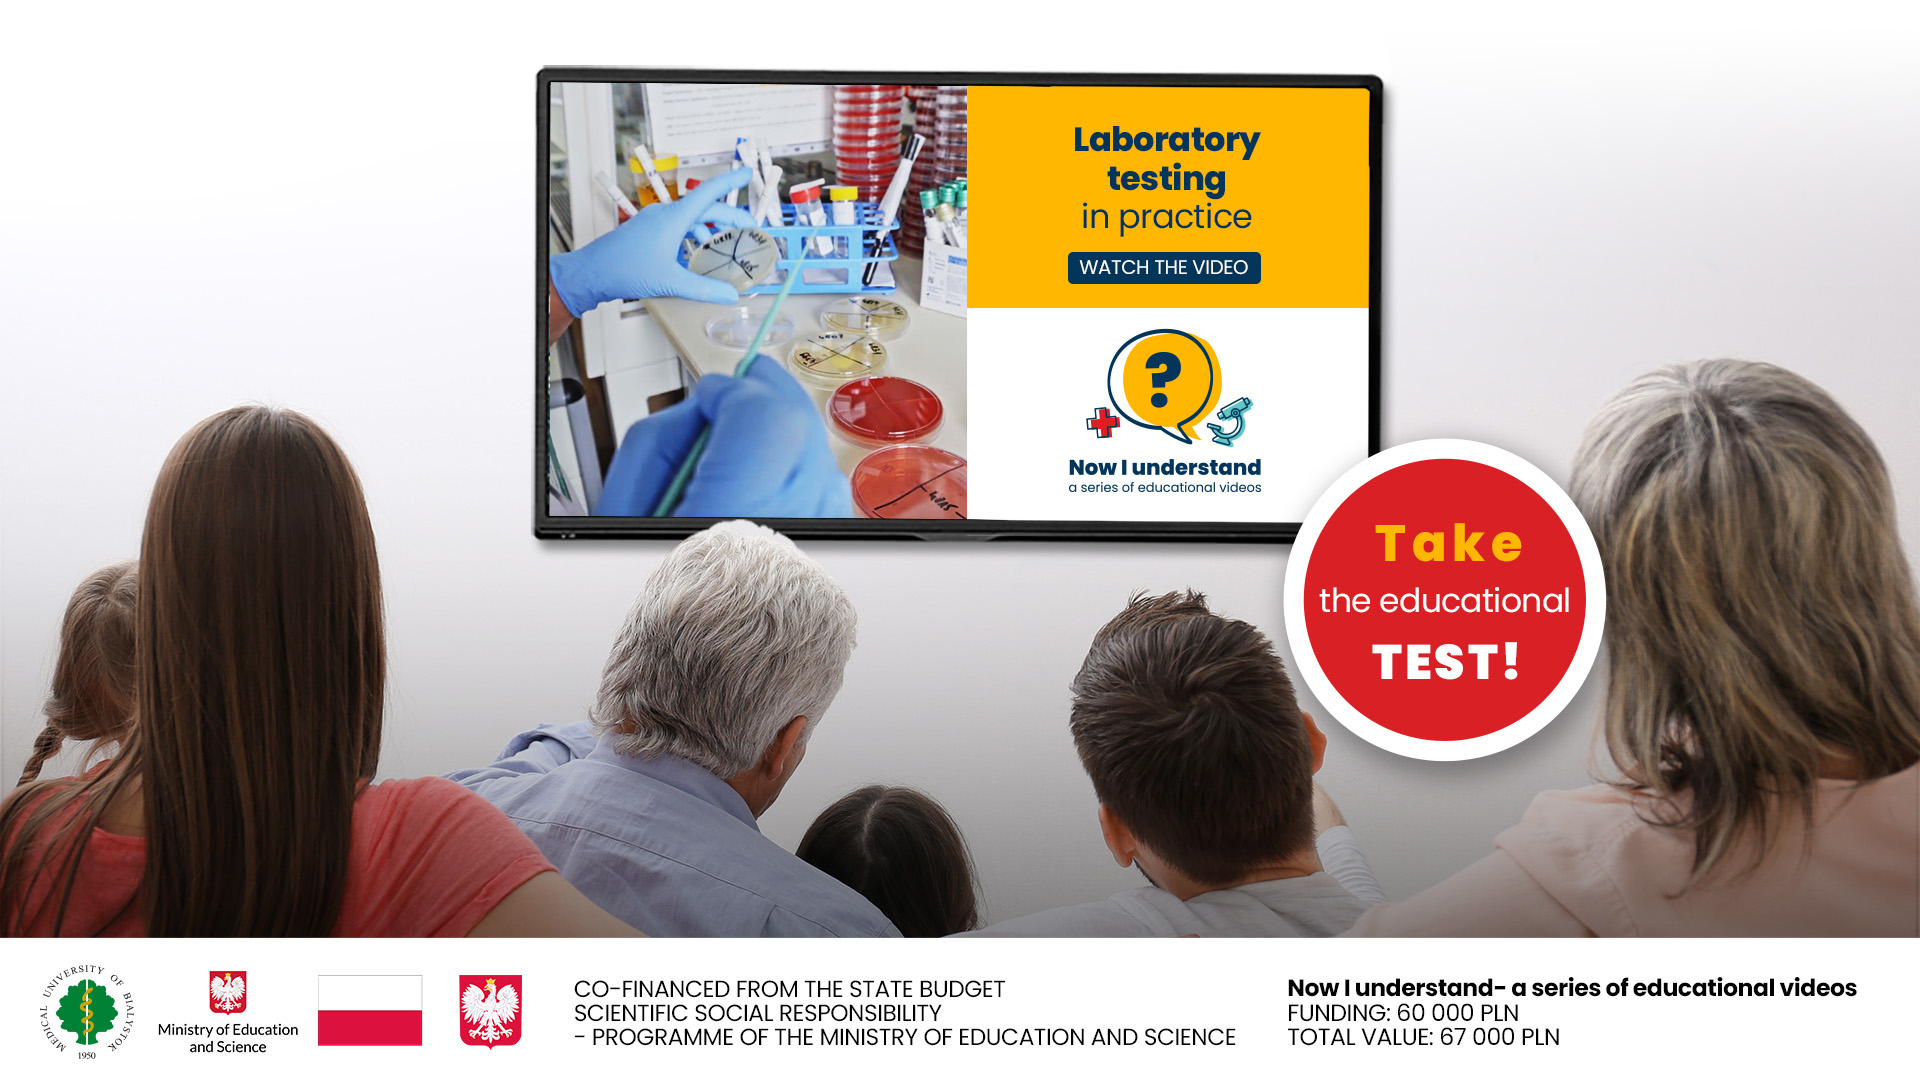 Laboratory testing in practice - take the eductional quiz!